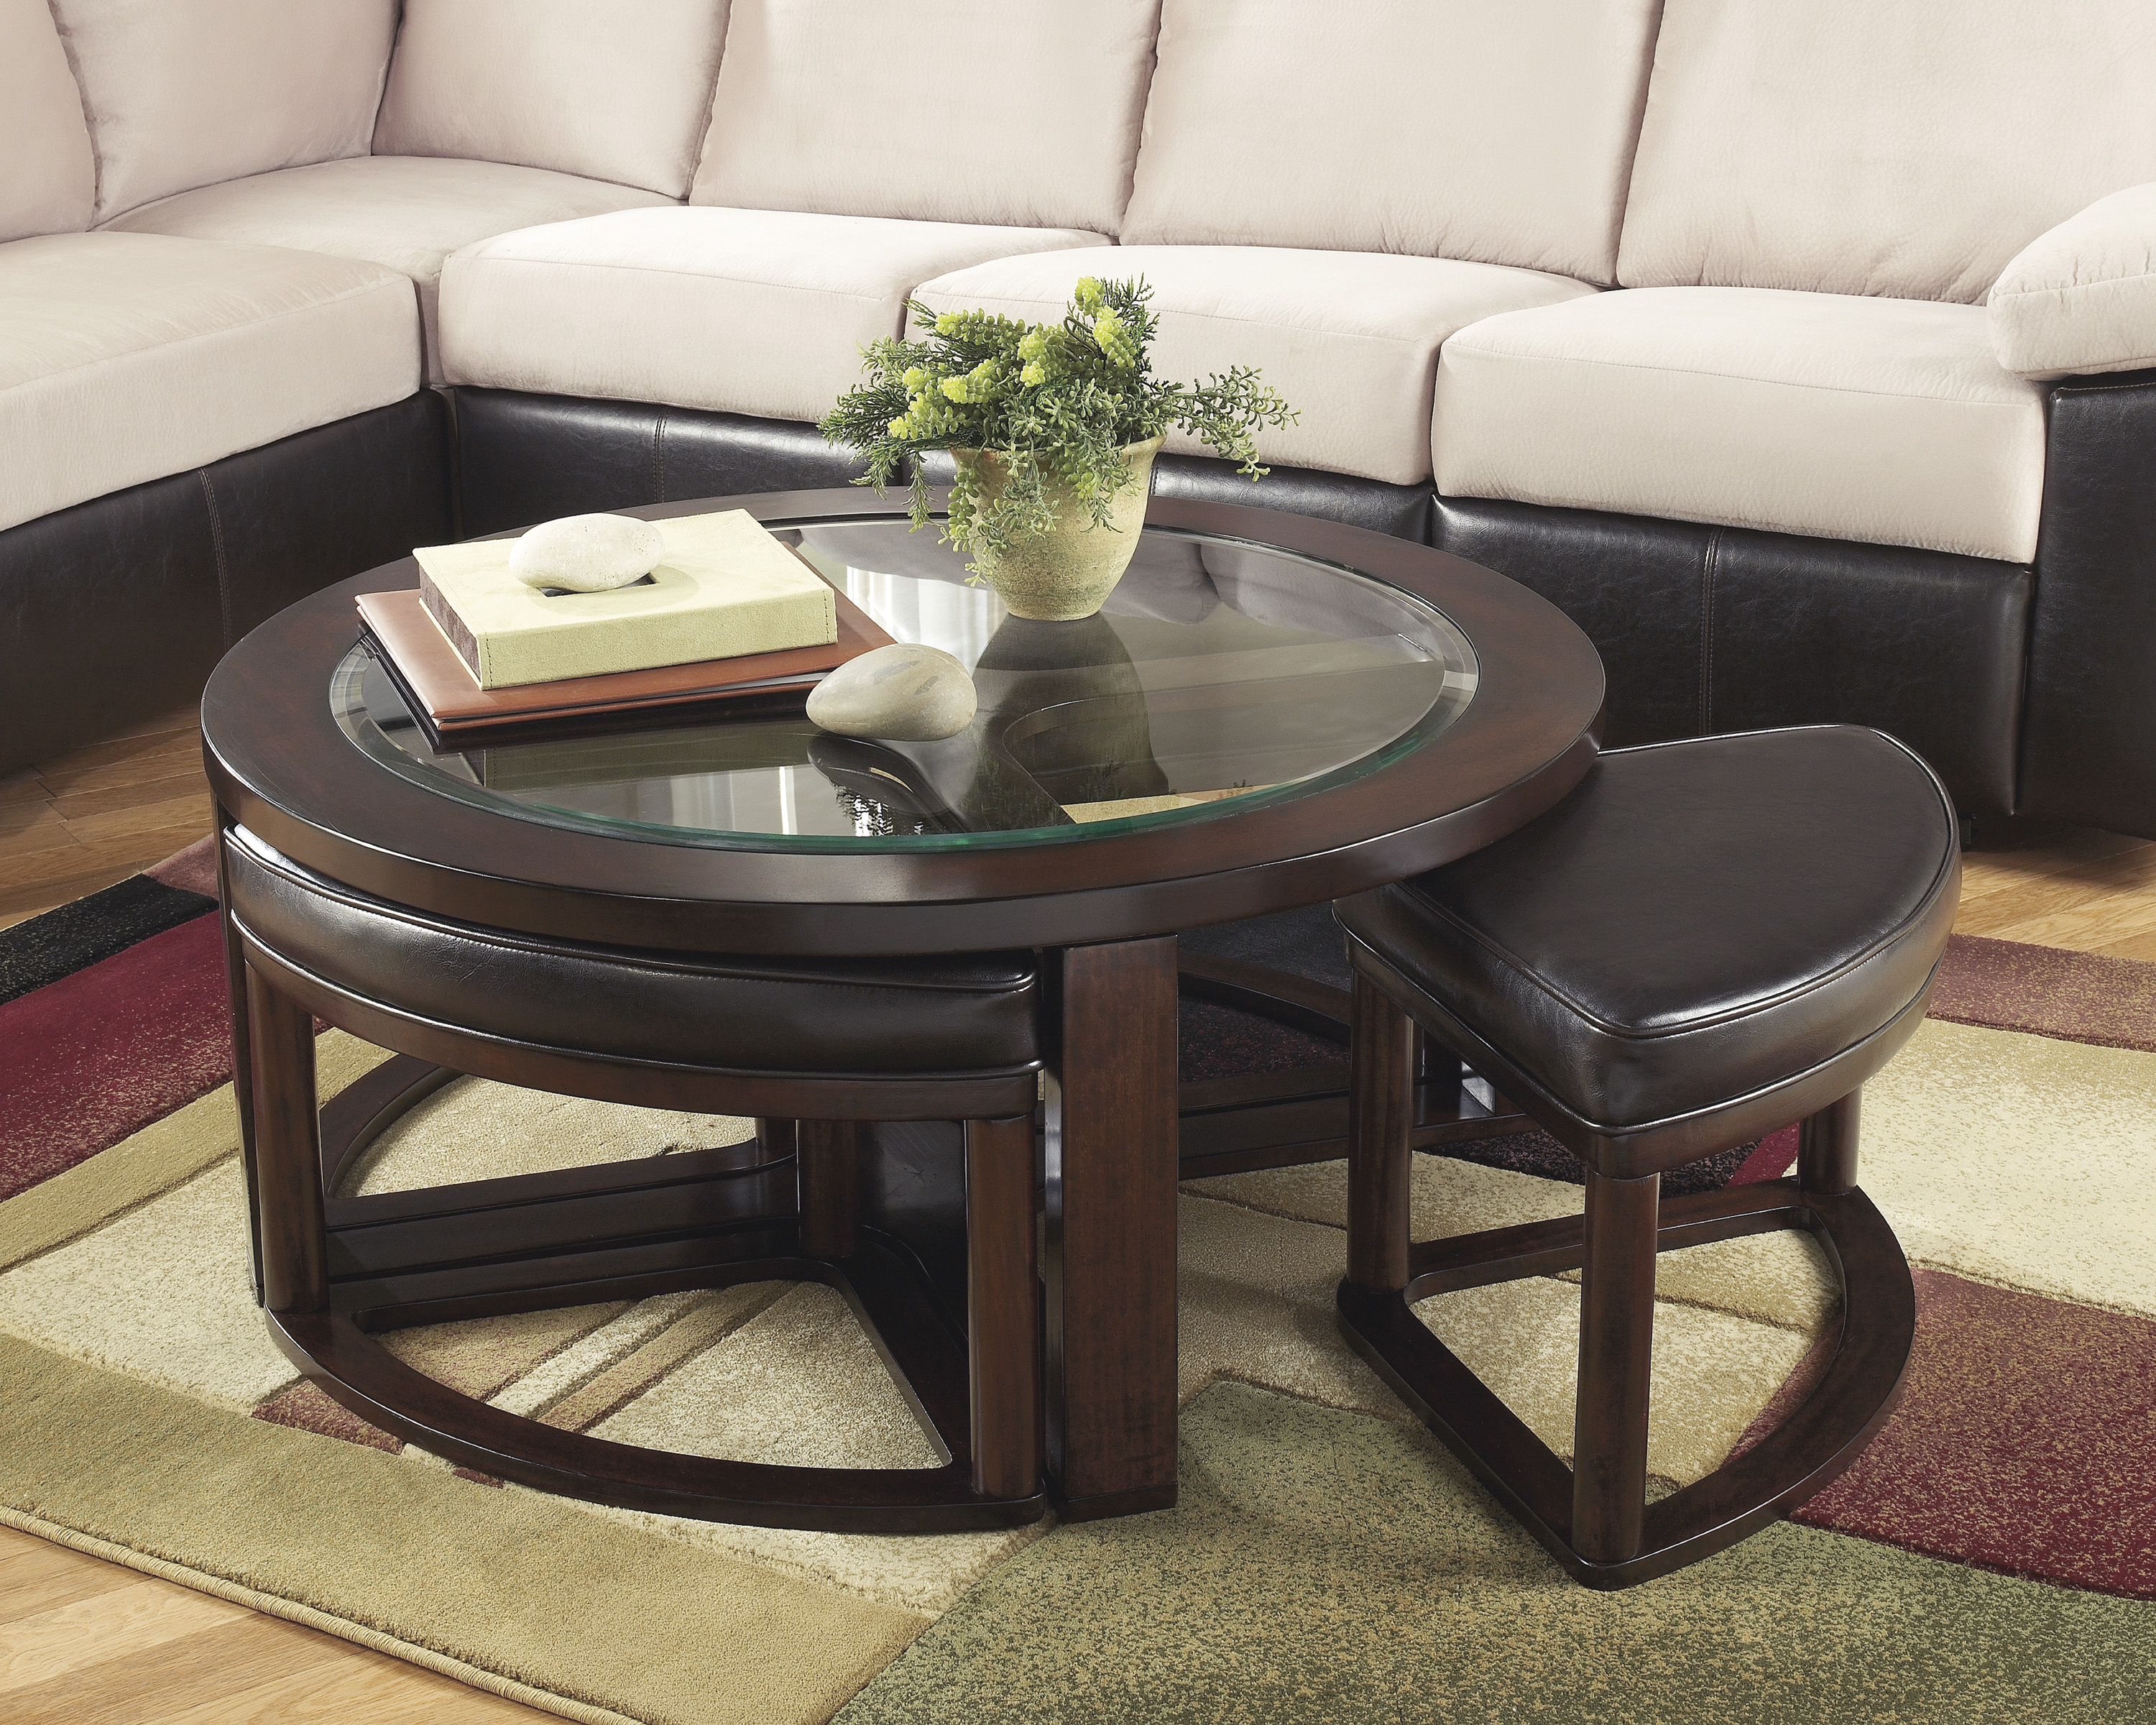 Marion Cocktail Table w/ 4 stools
Also Available with set of End Tables